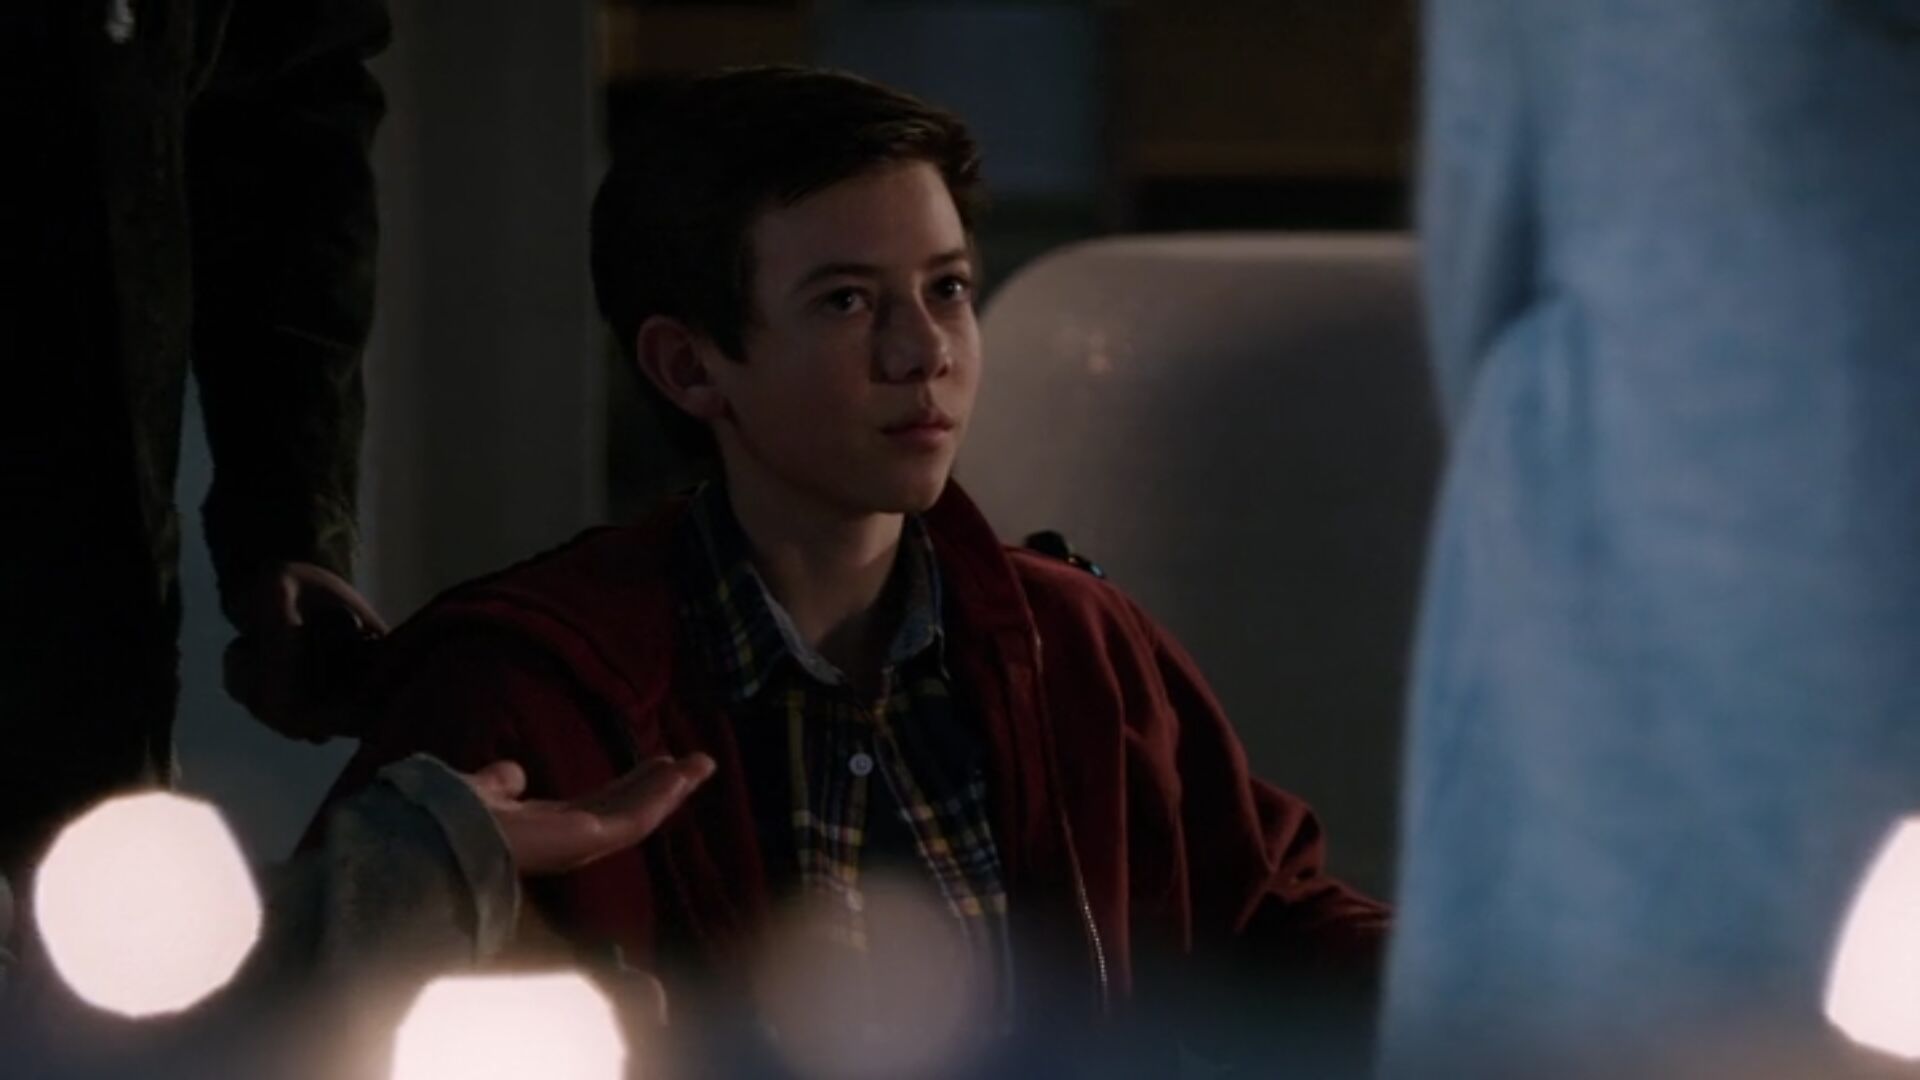 Griffin Gluck in Red Band Society